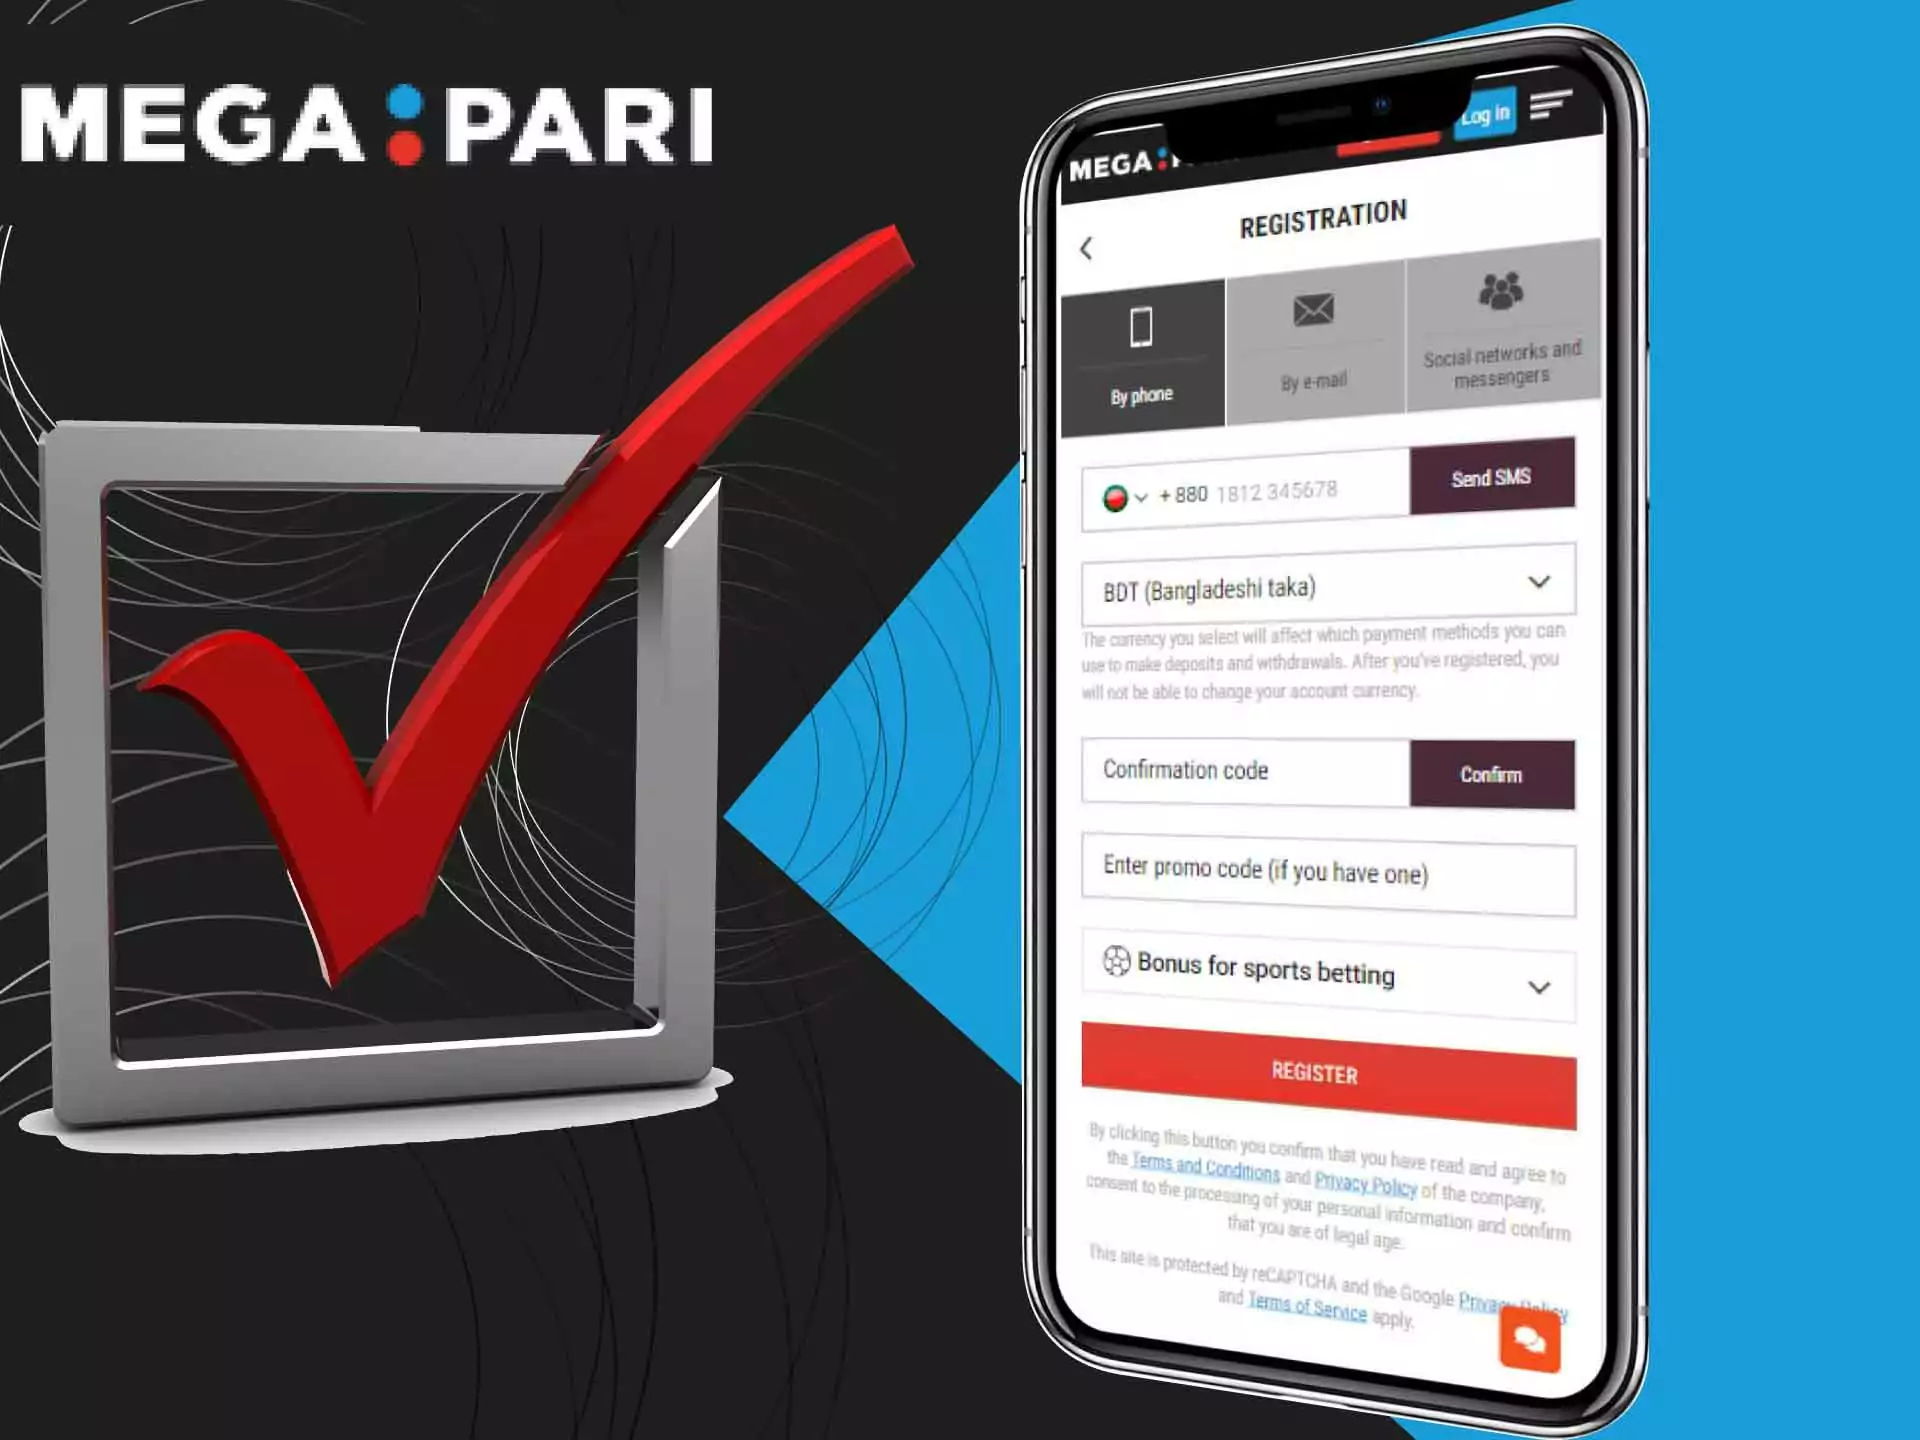 Sign up for MegaPari via your smartphone and start betting.